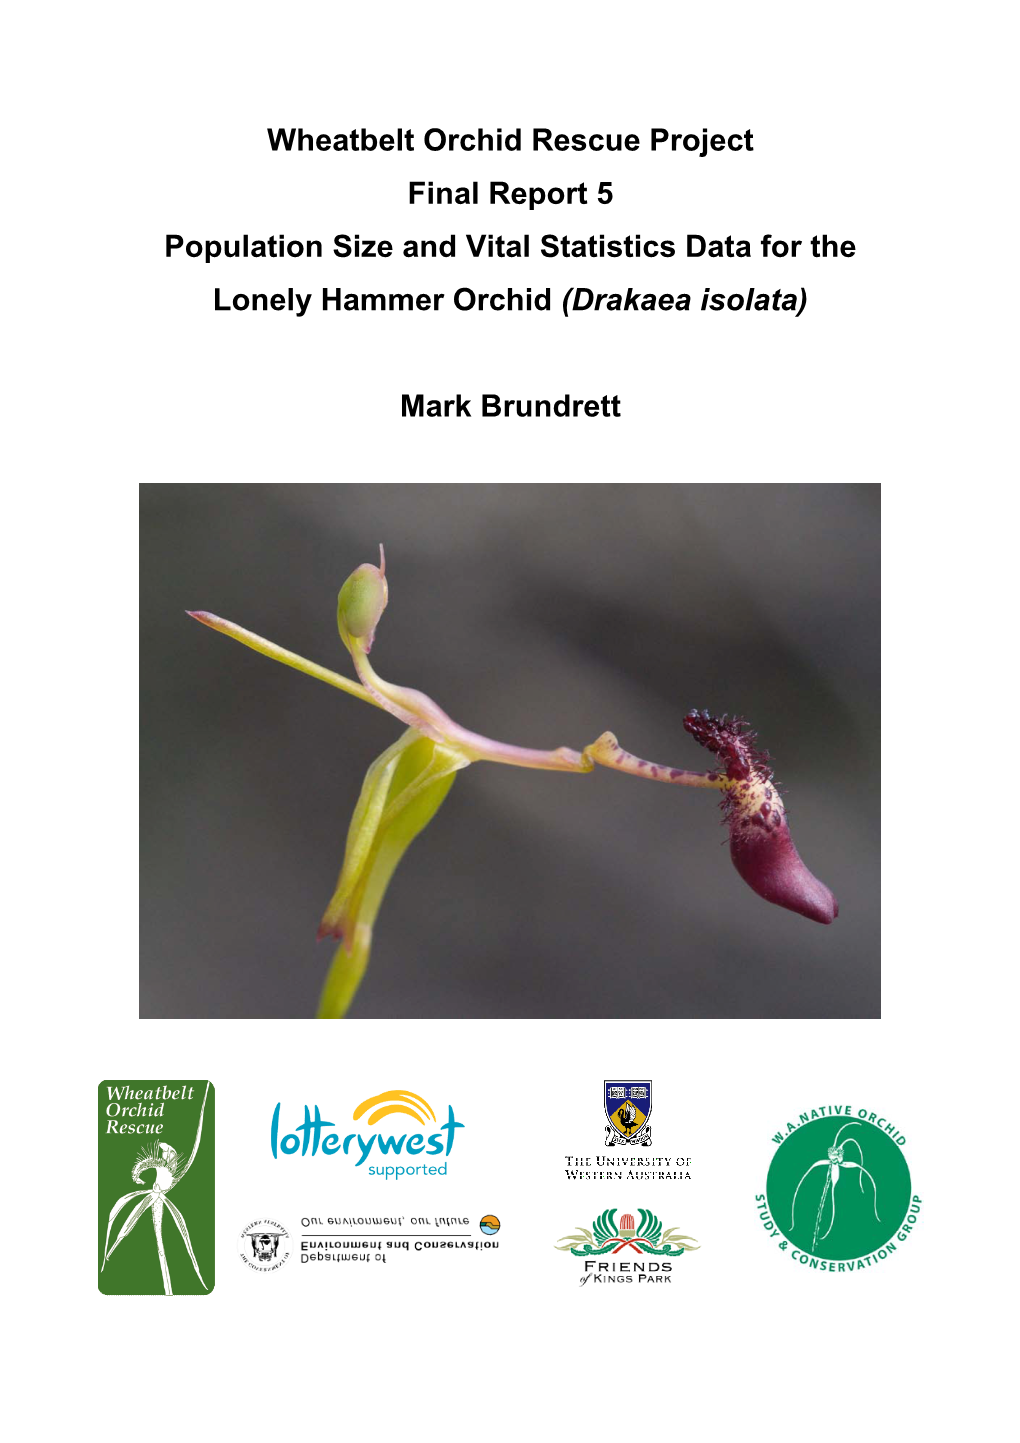 Wheatbelt Orchid Rescue Project Final Report 5 Population Size and Vital Statistics Data for the Lonely Hammer Orchid (Drakaea Isolata)